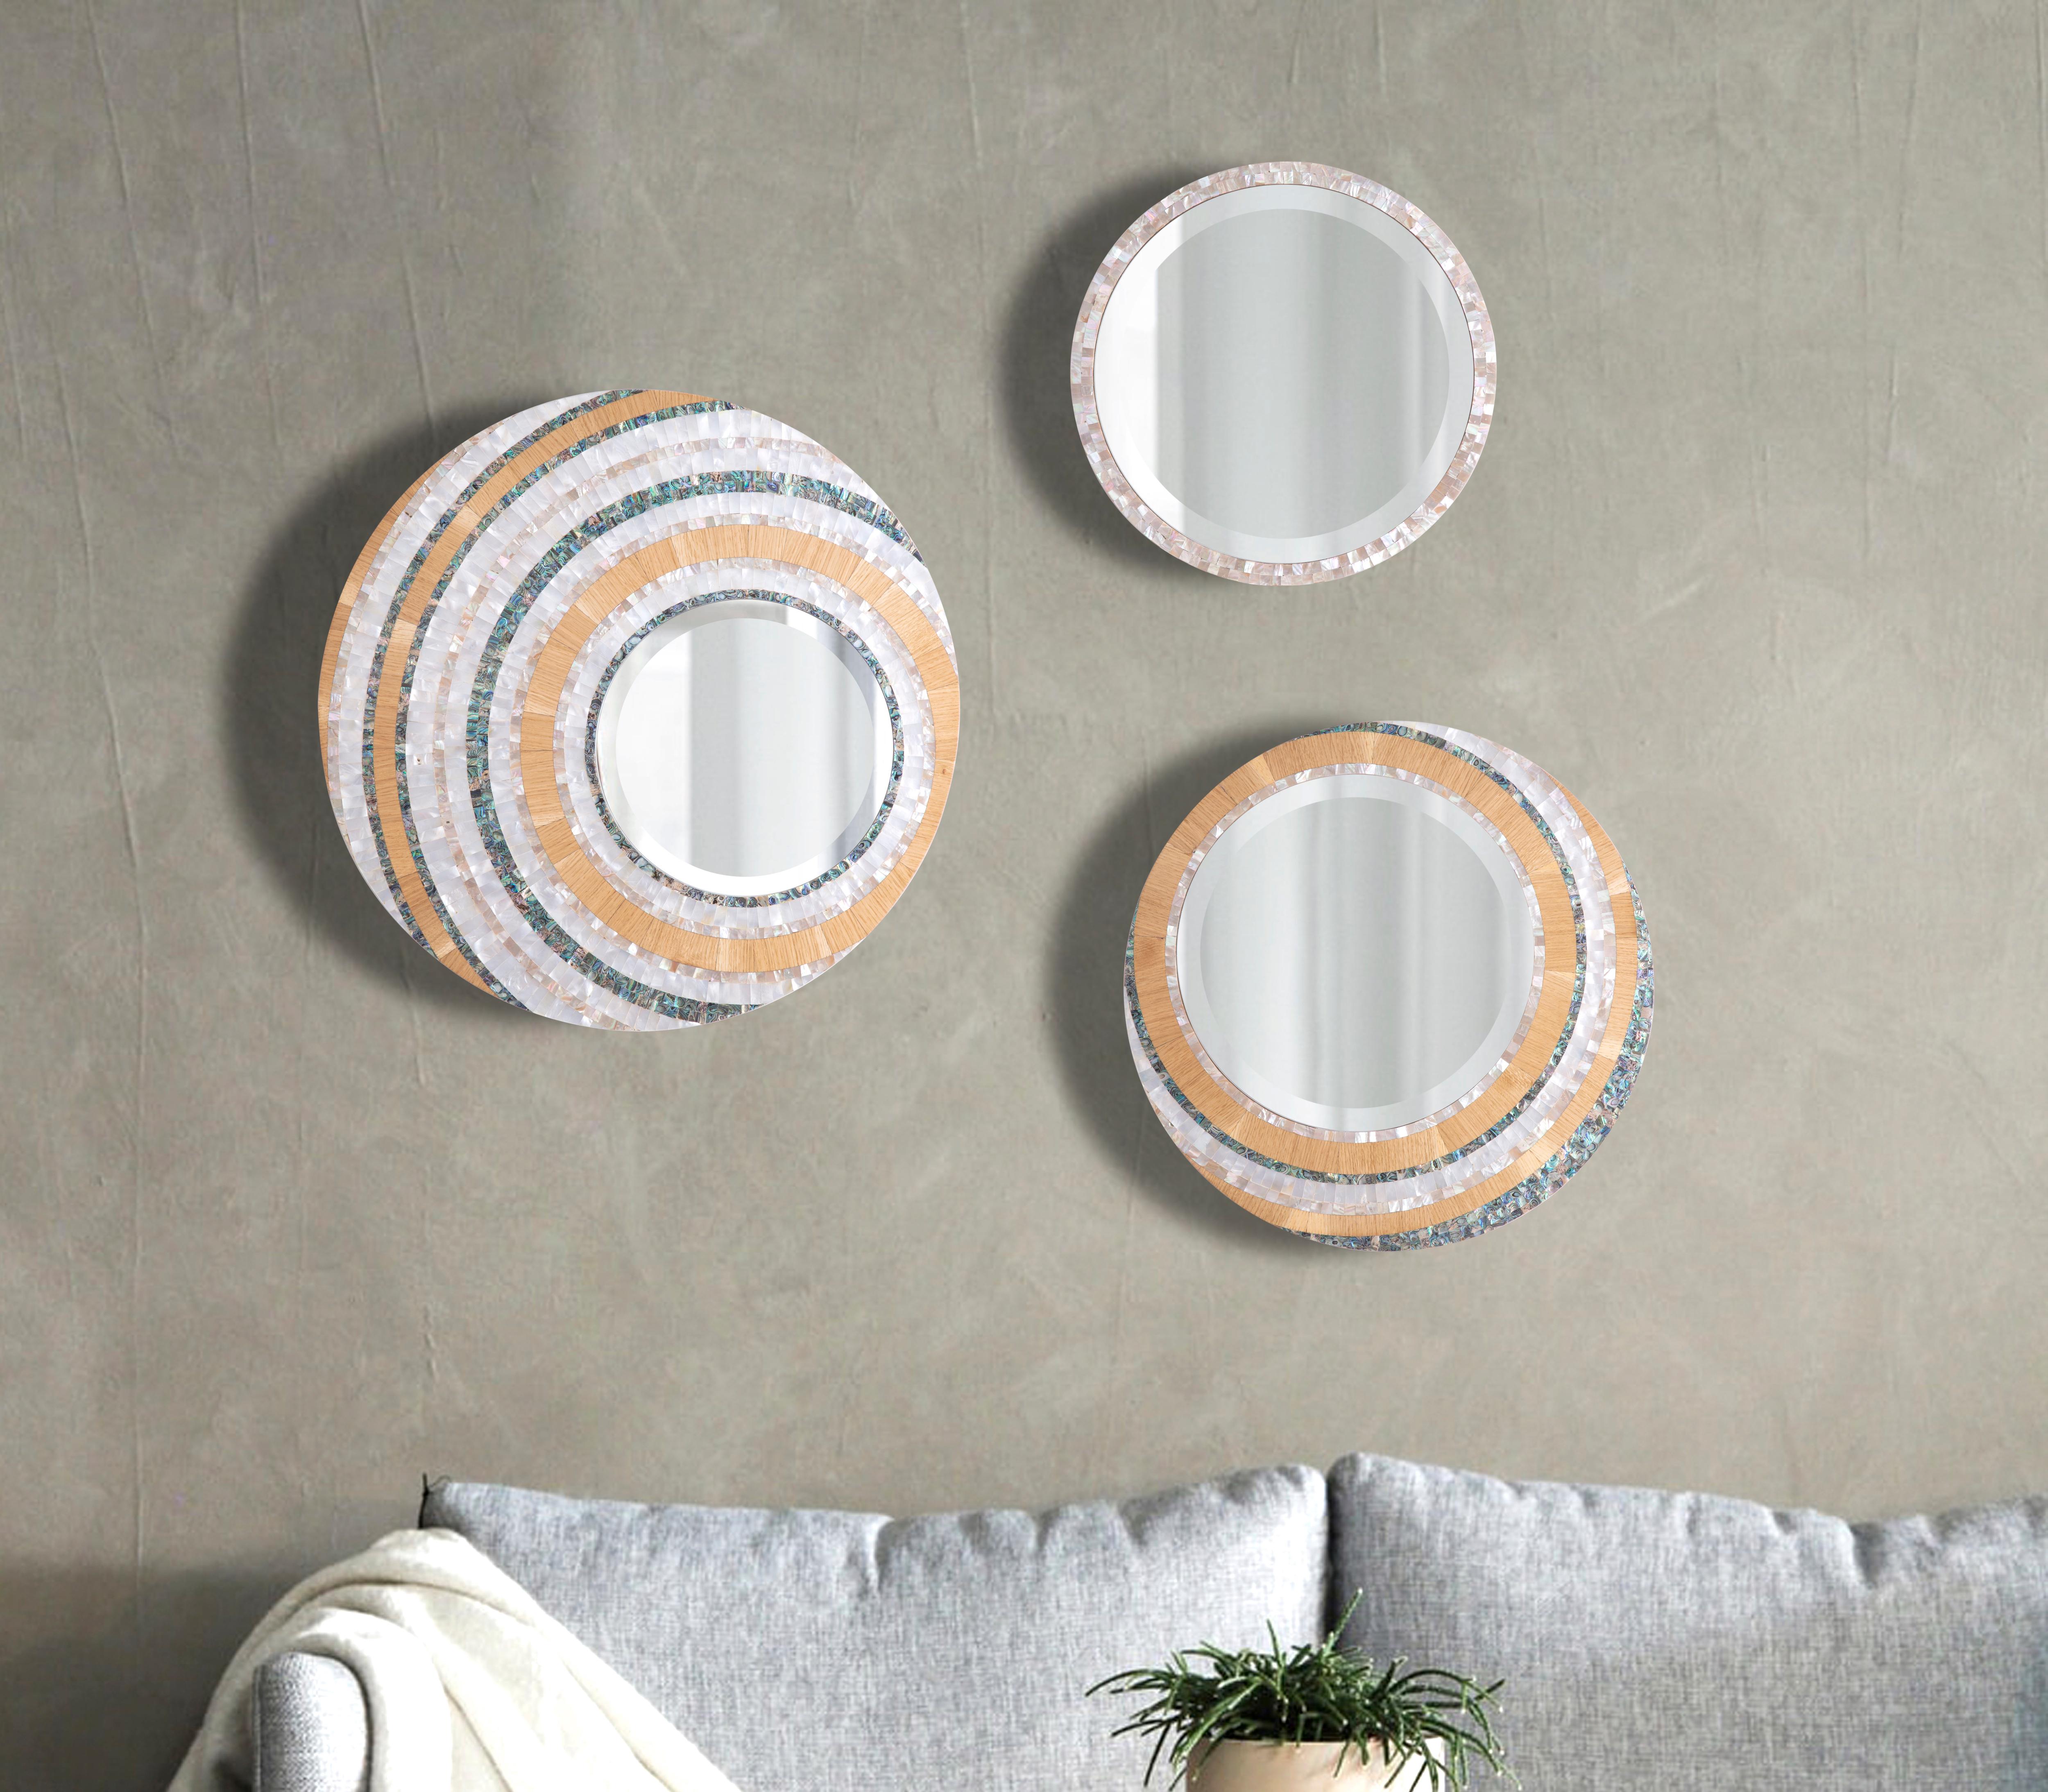 Hand-crafted decorative mirror with three colors of genuine mother-of-pearl - medium.
Just like the sun, this trio of mirrors brings rays of warmth and joy to any space. They are intricately designed with three colors of genuine mother-of-pearl and